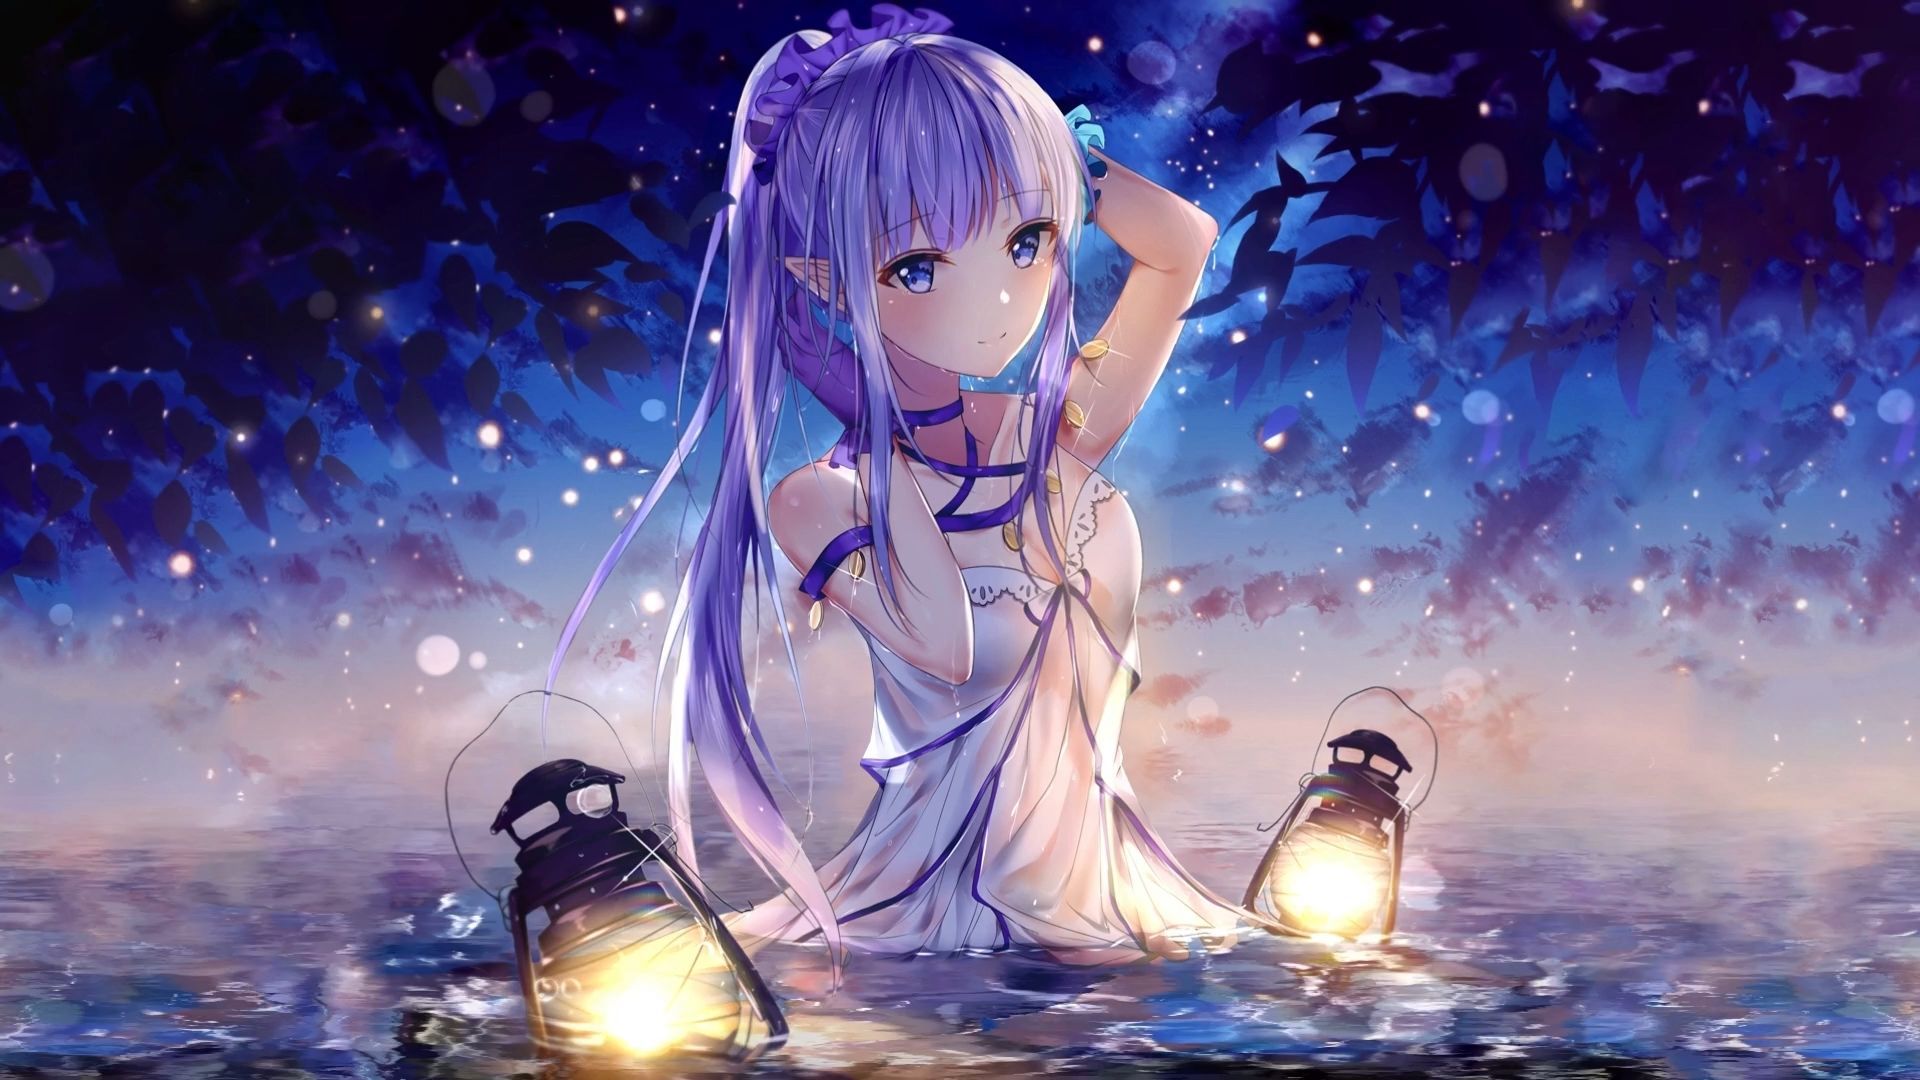 Fate Grand Order Lily Queen in The Sea [Wallpaper Engine Anime]. Anime wallpaper download, Anime, Anime wallpaper